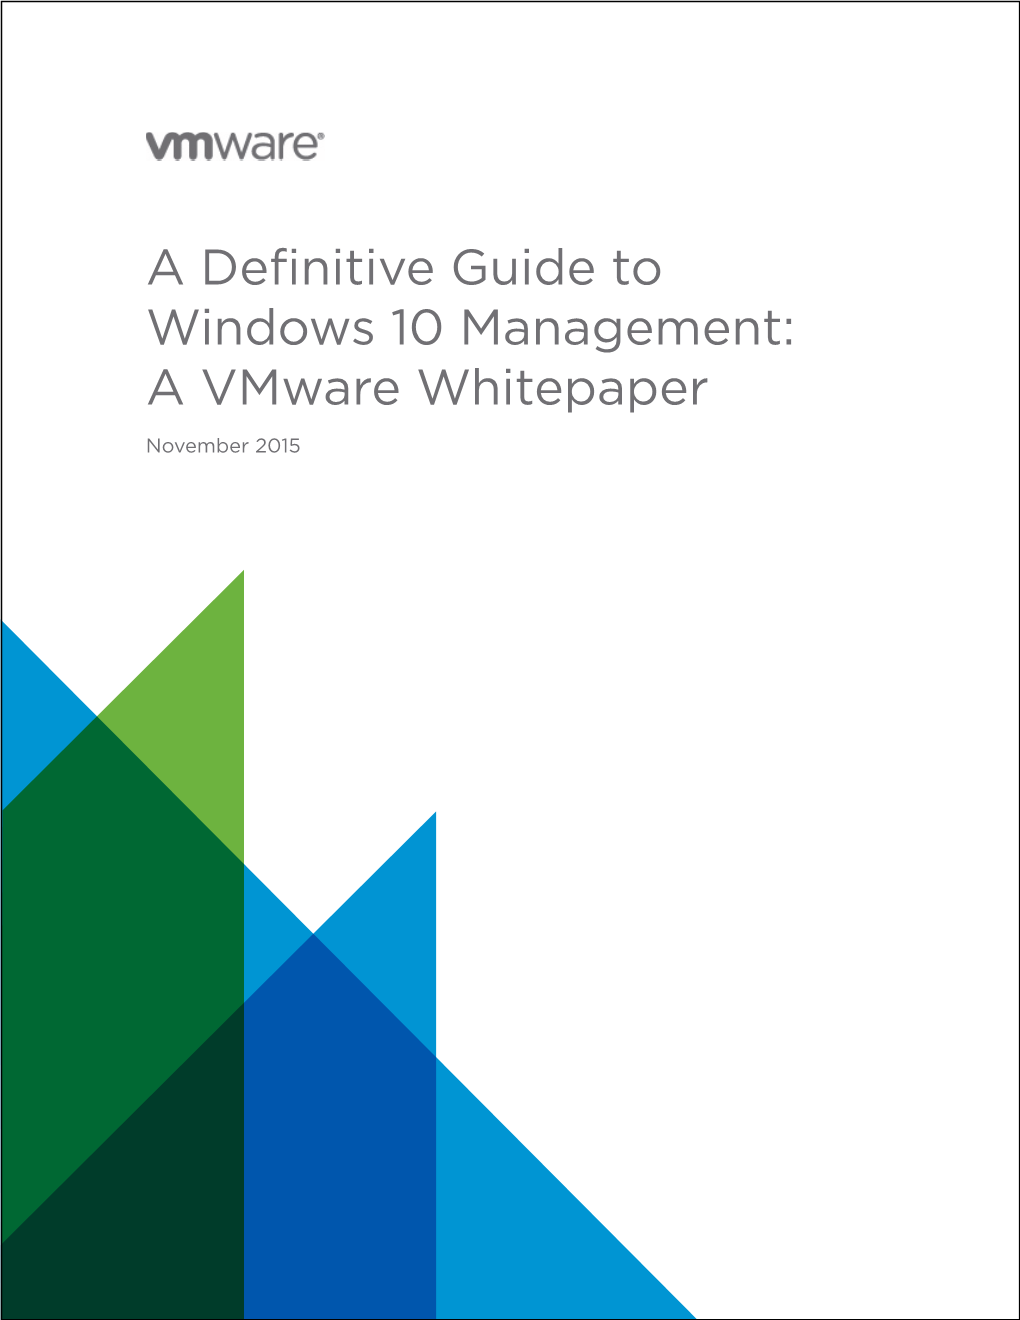 A Definitive Guide to Windows 10 Management: a Vmware Whitepaper